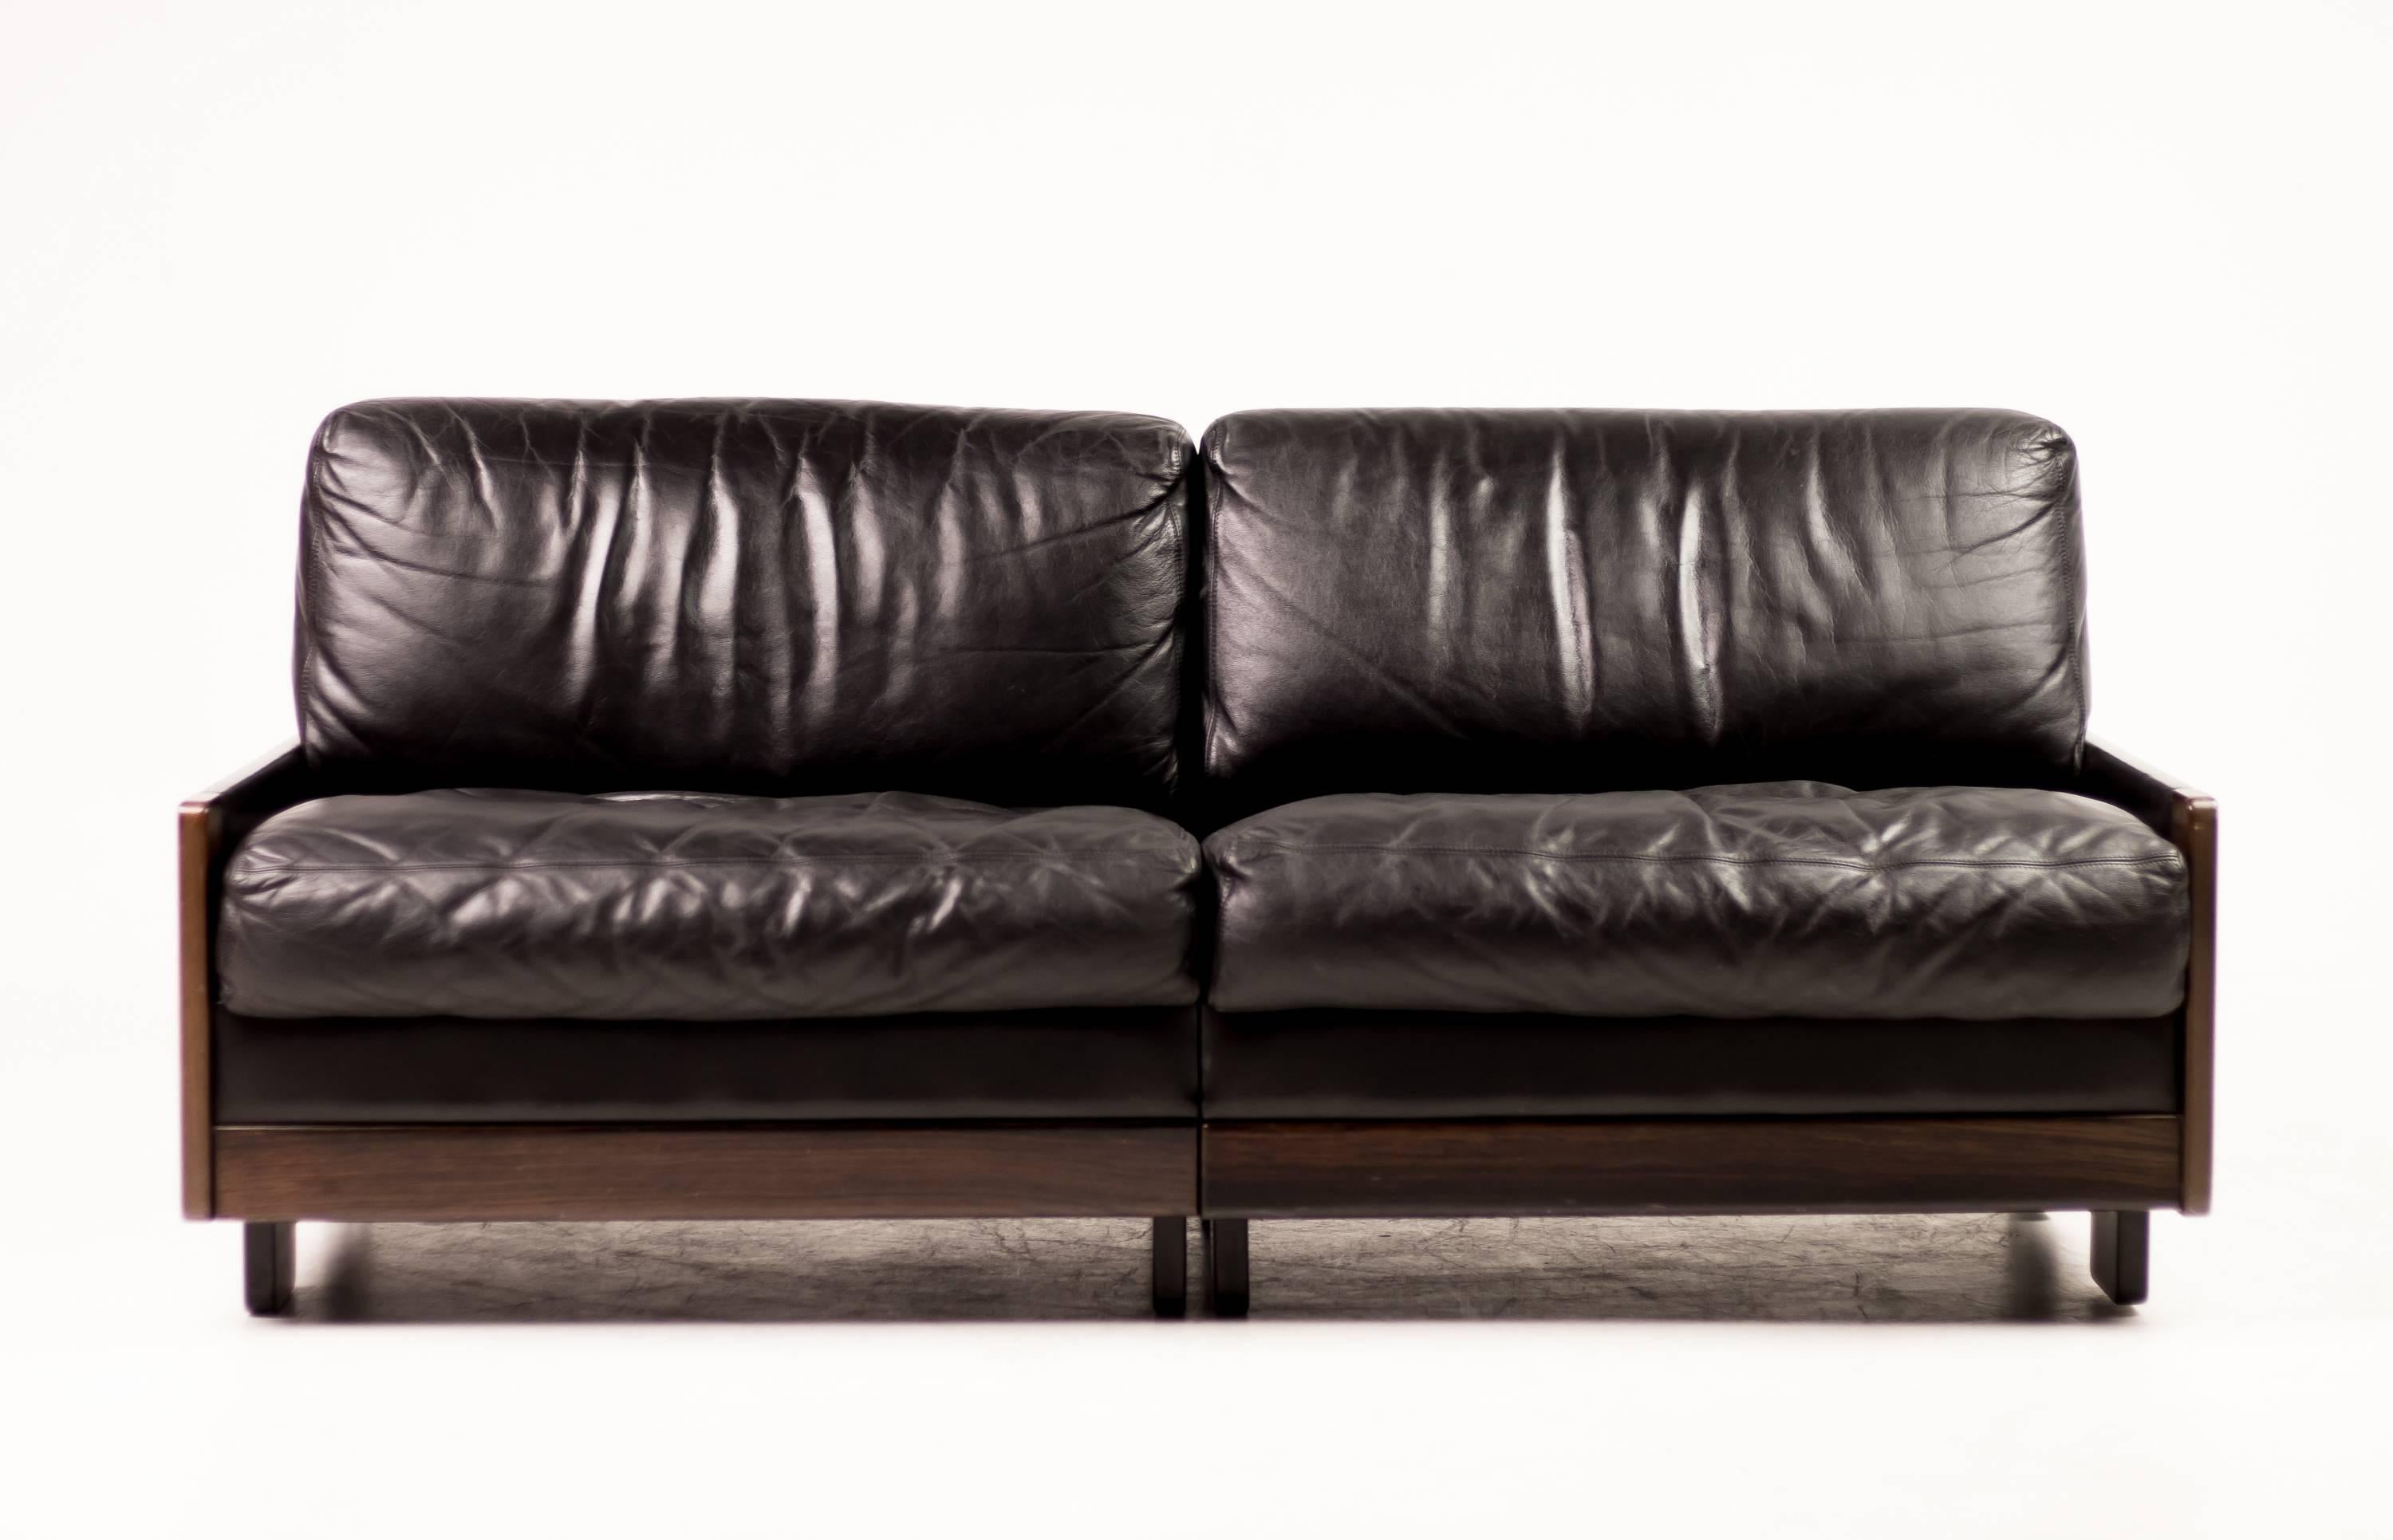 Sofa manufactured by Cassina in 1966, designed by Afra and Tobia Scarpa.
Mahogany frame with black leather covering the sides and back, seat and back cushions. 
Base in black painted wood.